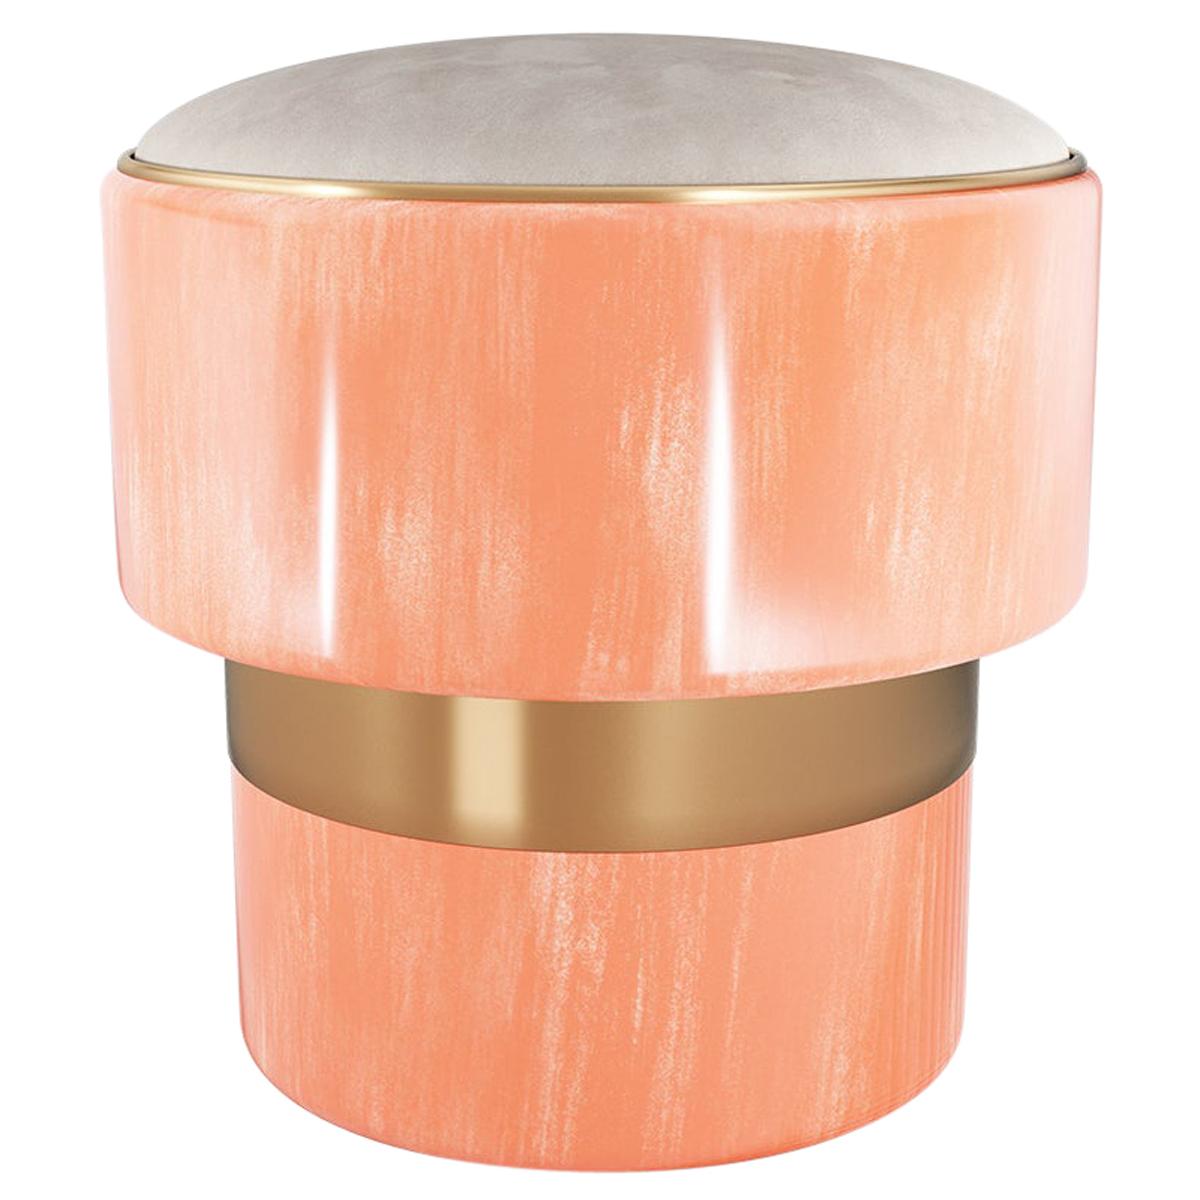 21st Century Contemporary Stool In Suede, Handpainted Lacquer & Golden Details For Sale